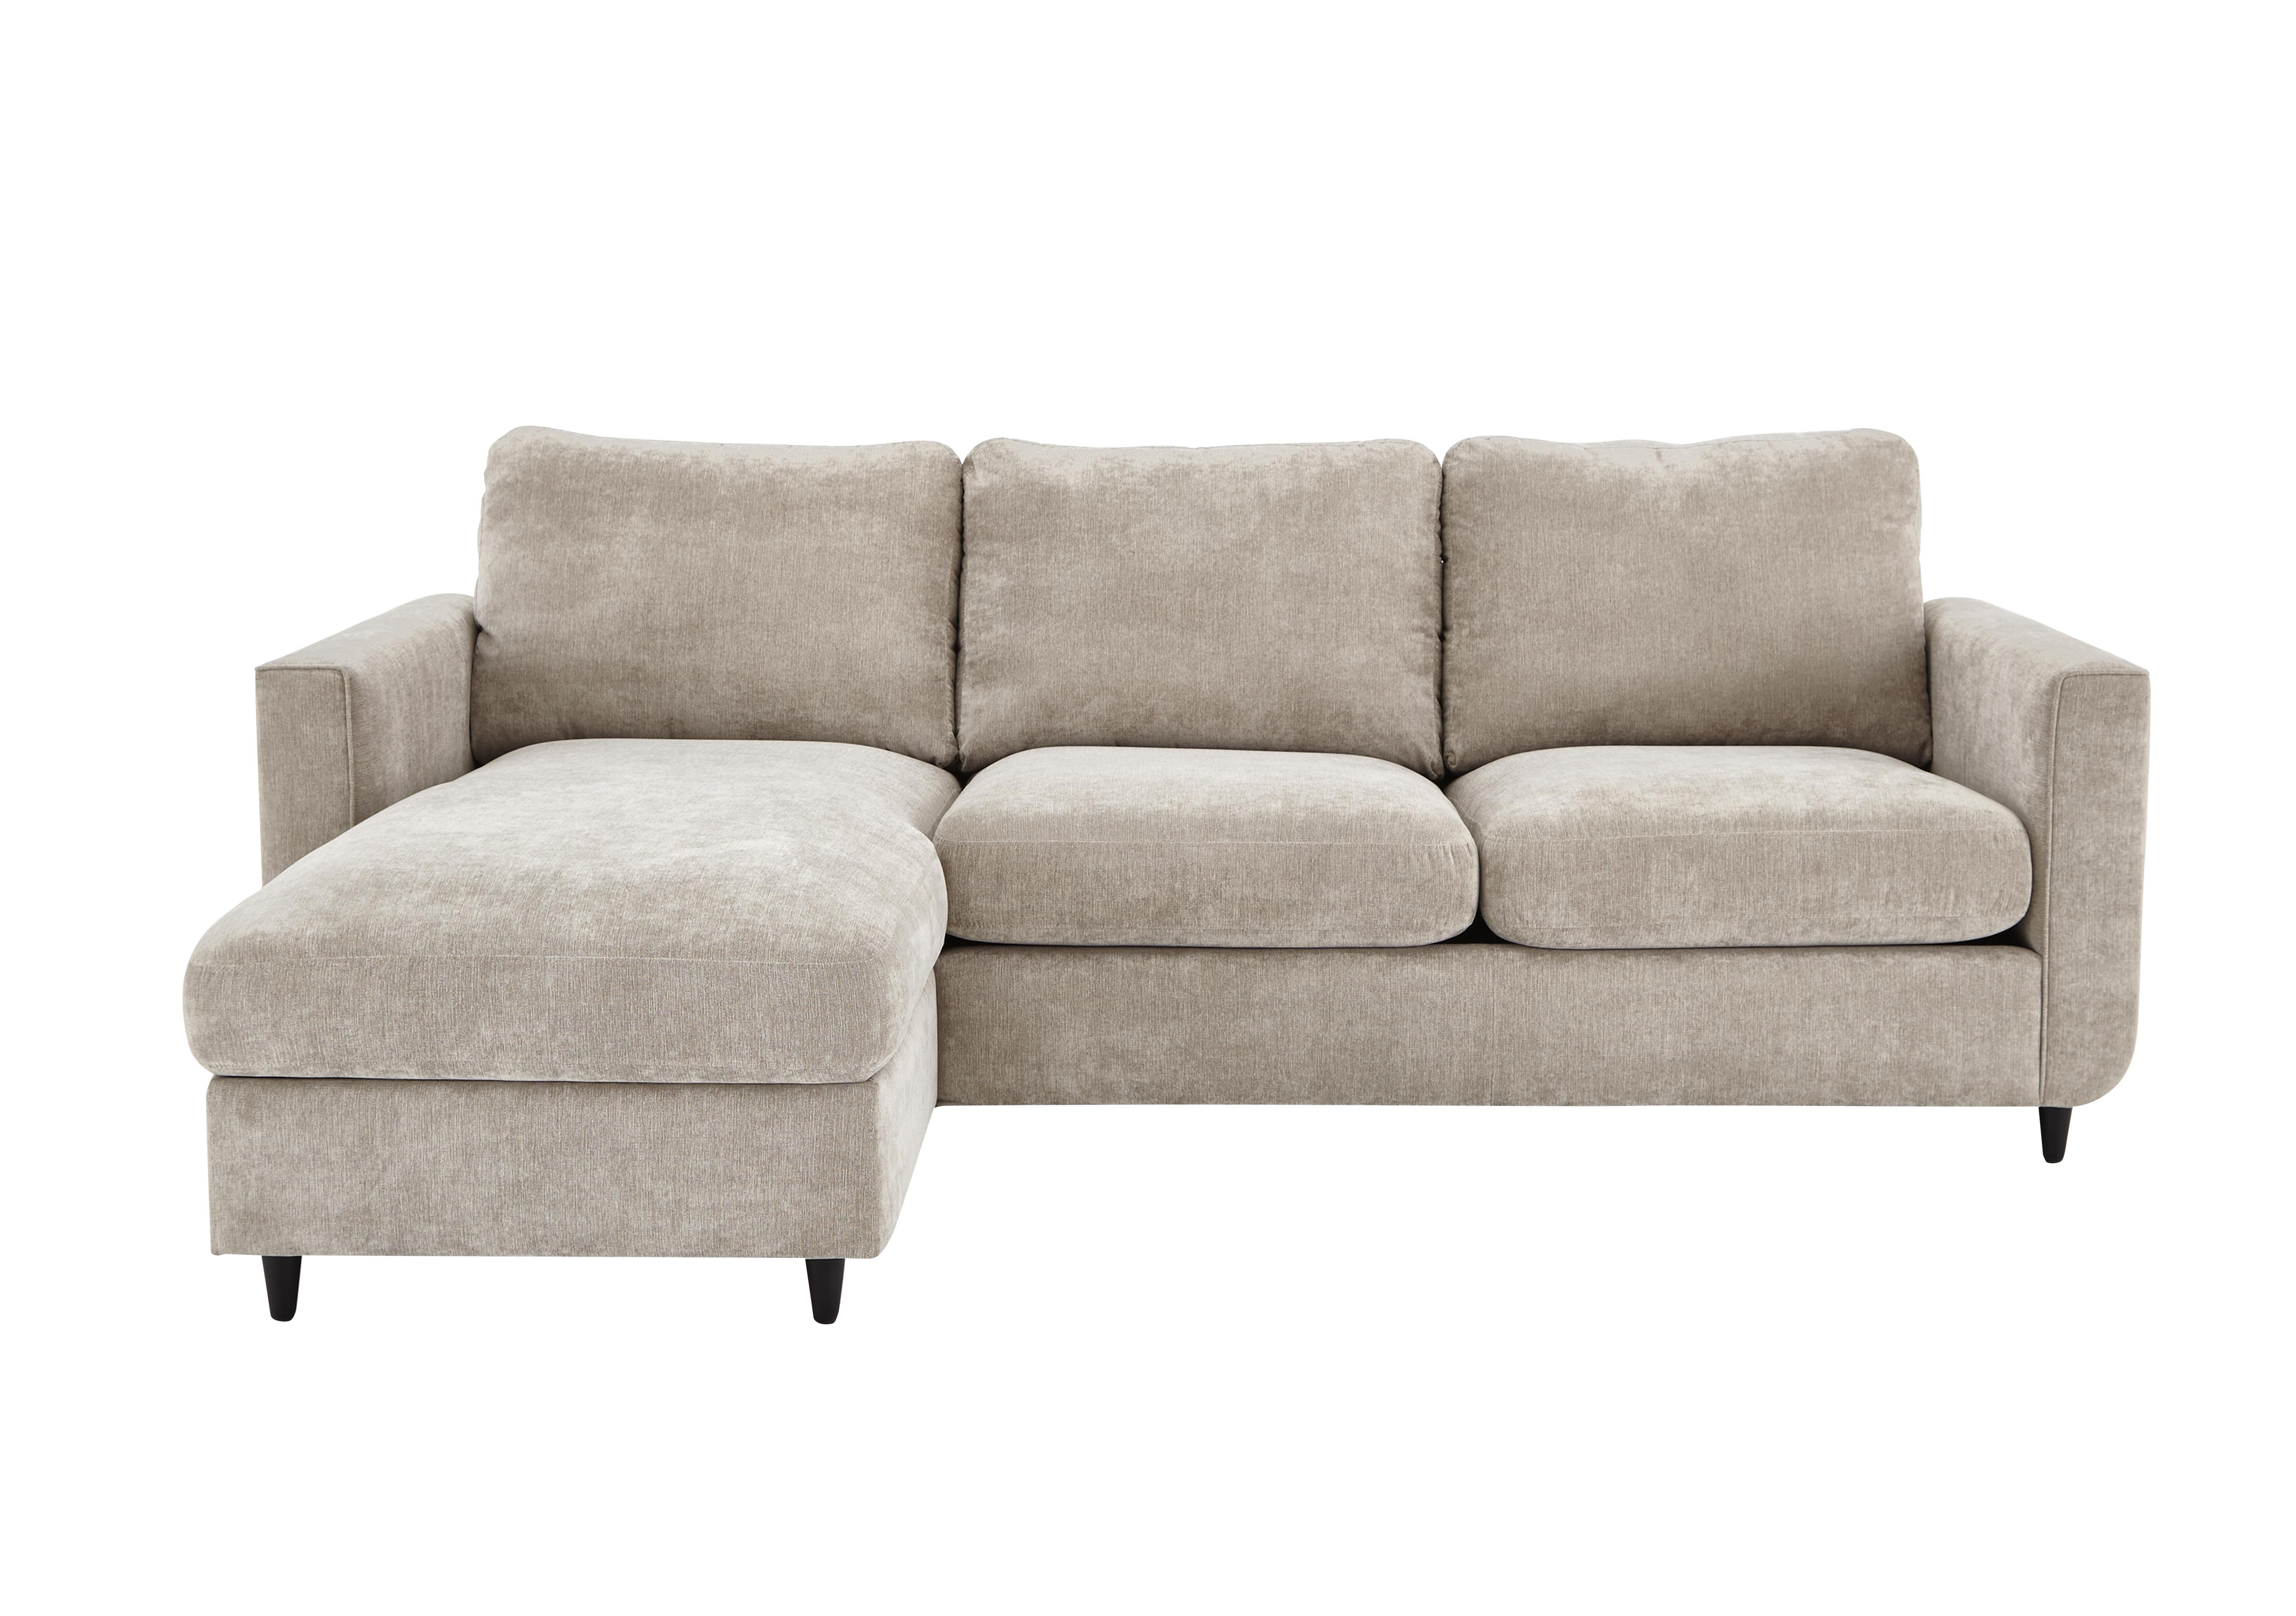 Esprit Fabric Chaise Sofa Bed with Storage in Silver Ebony Feet on Furniture Village